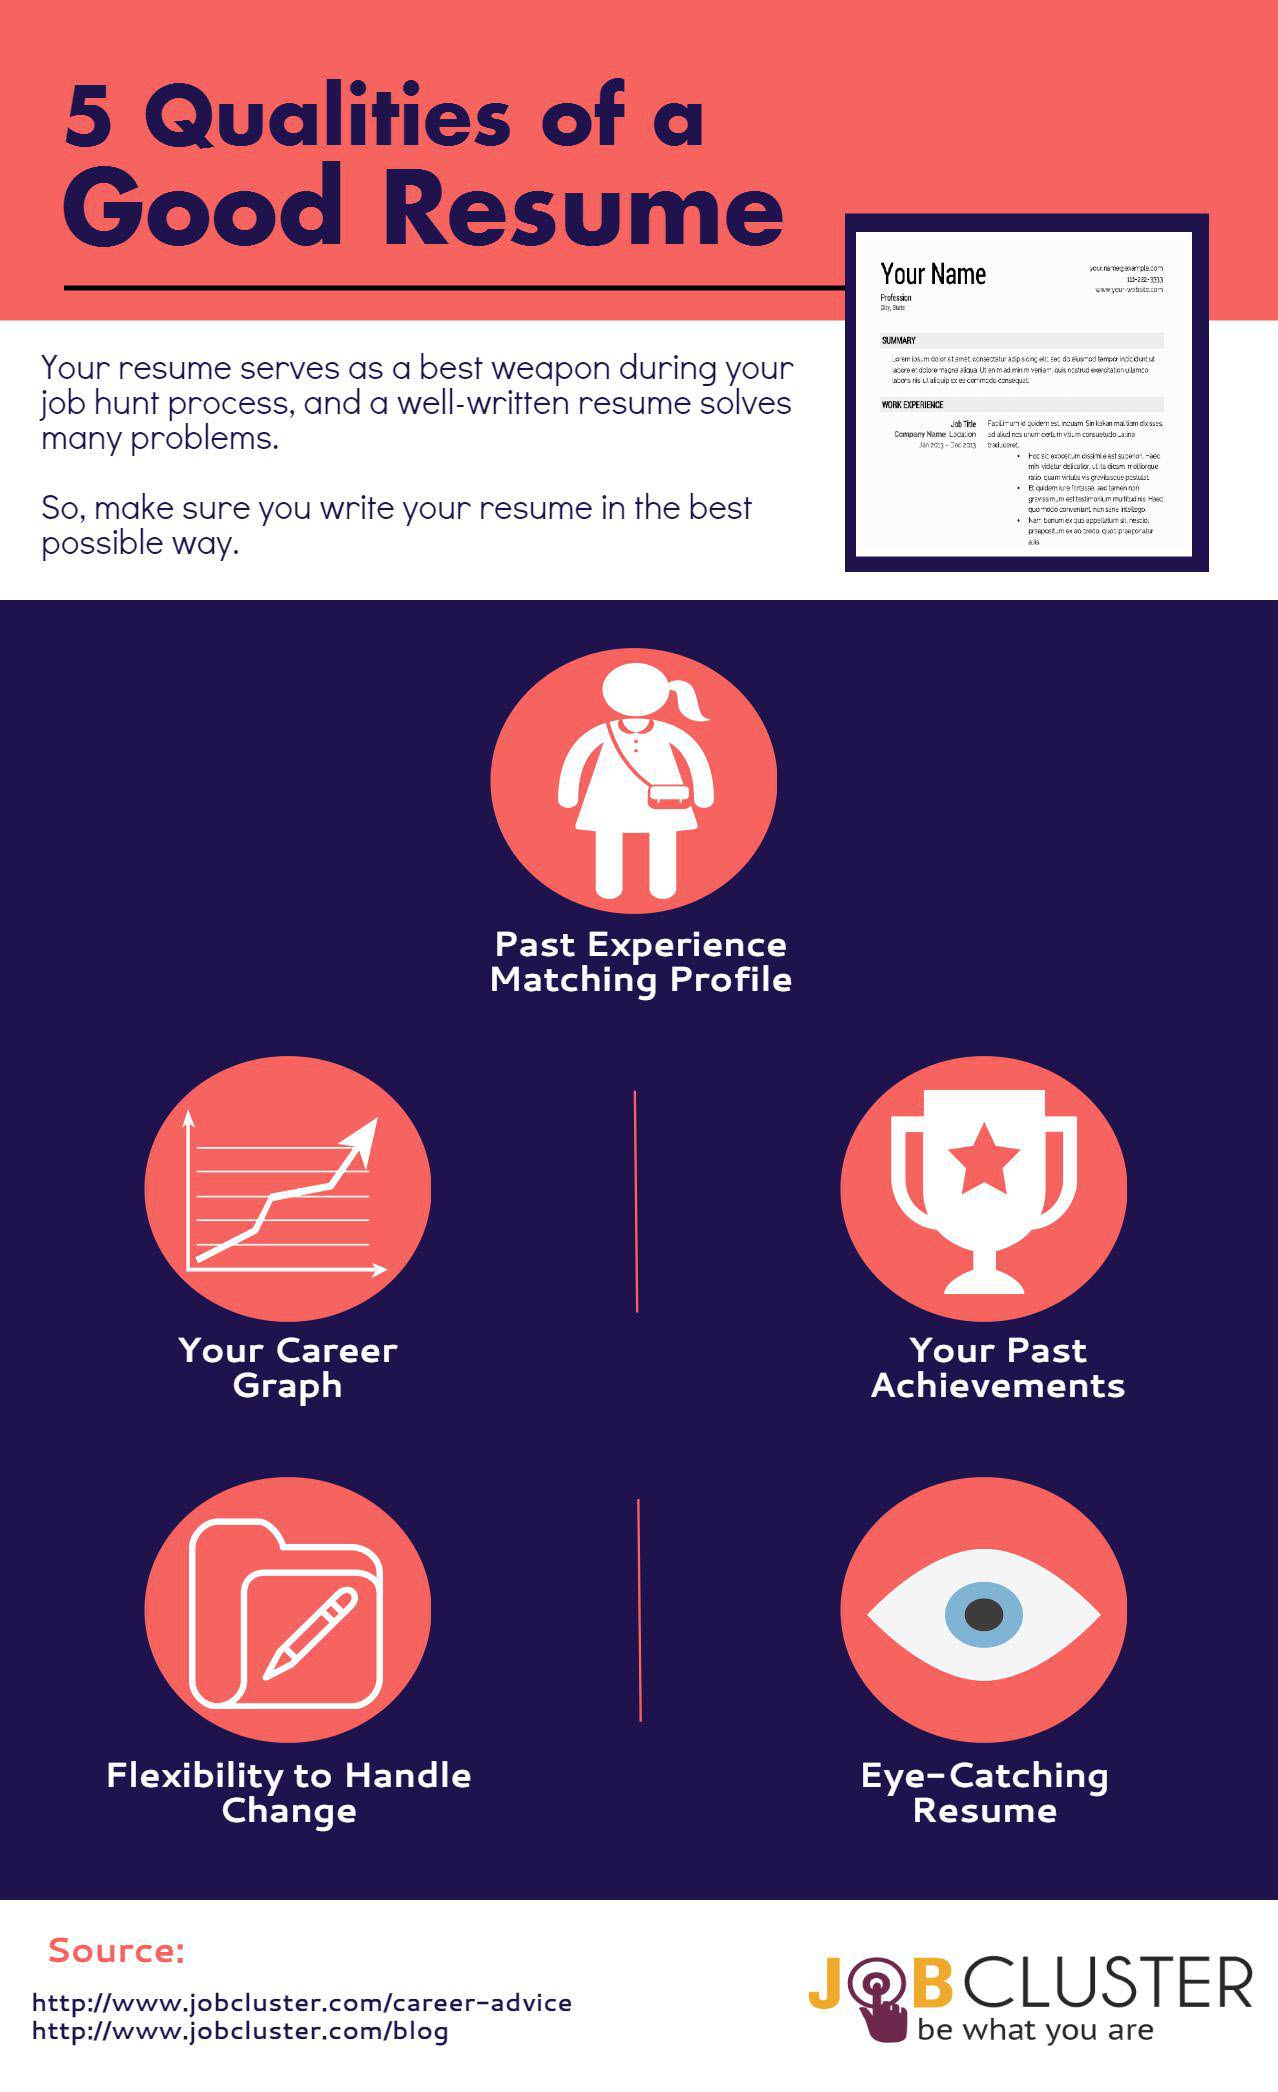 5 Resume qualities of a good resume- Infographic